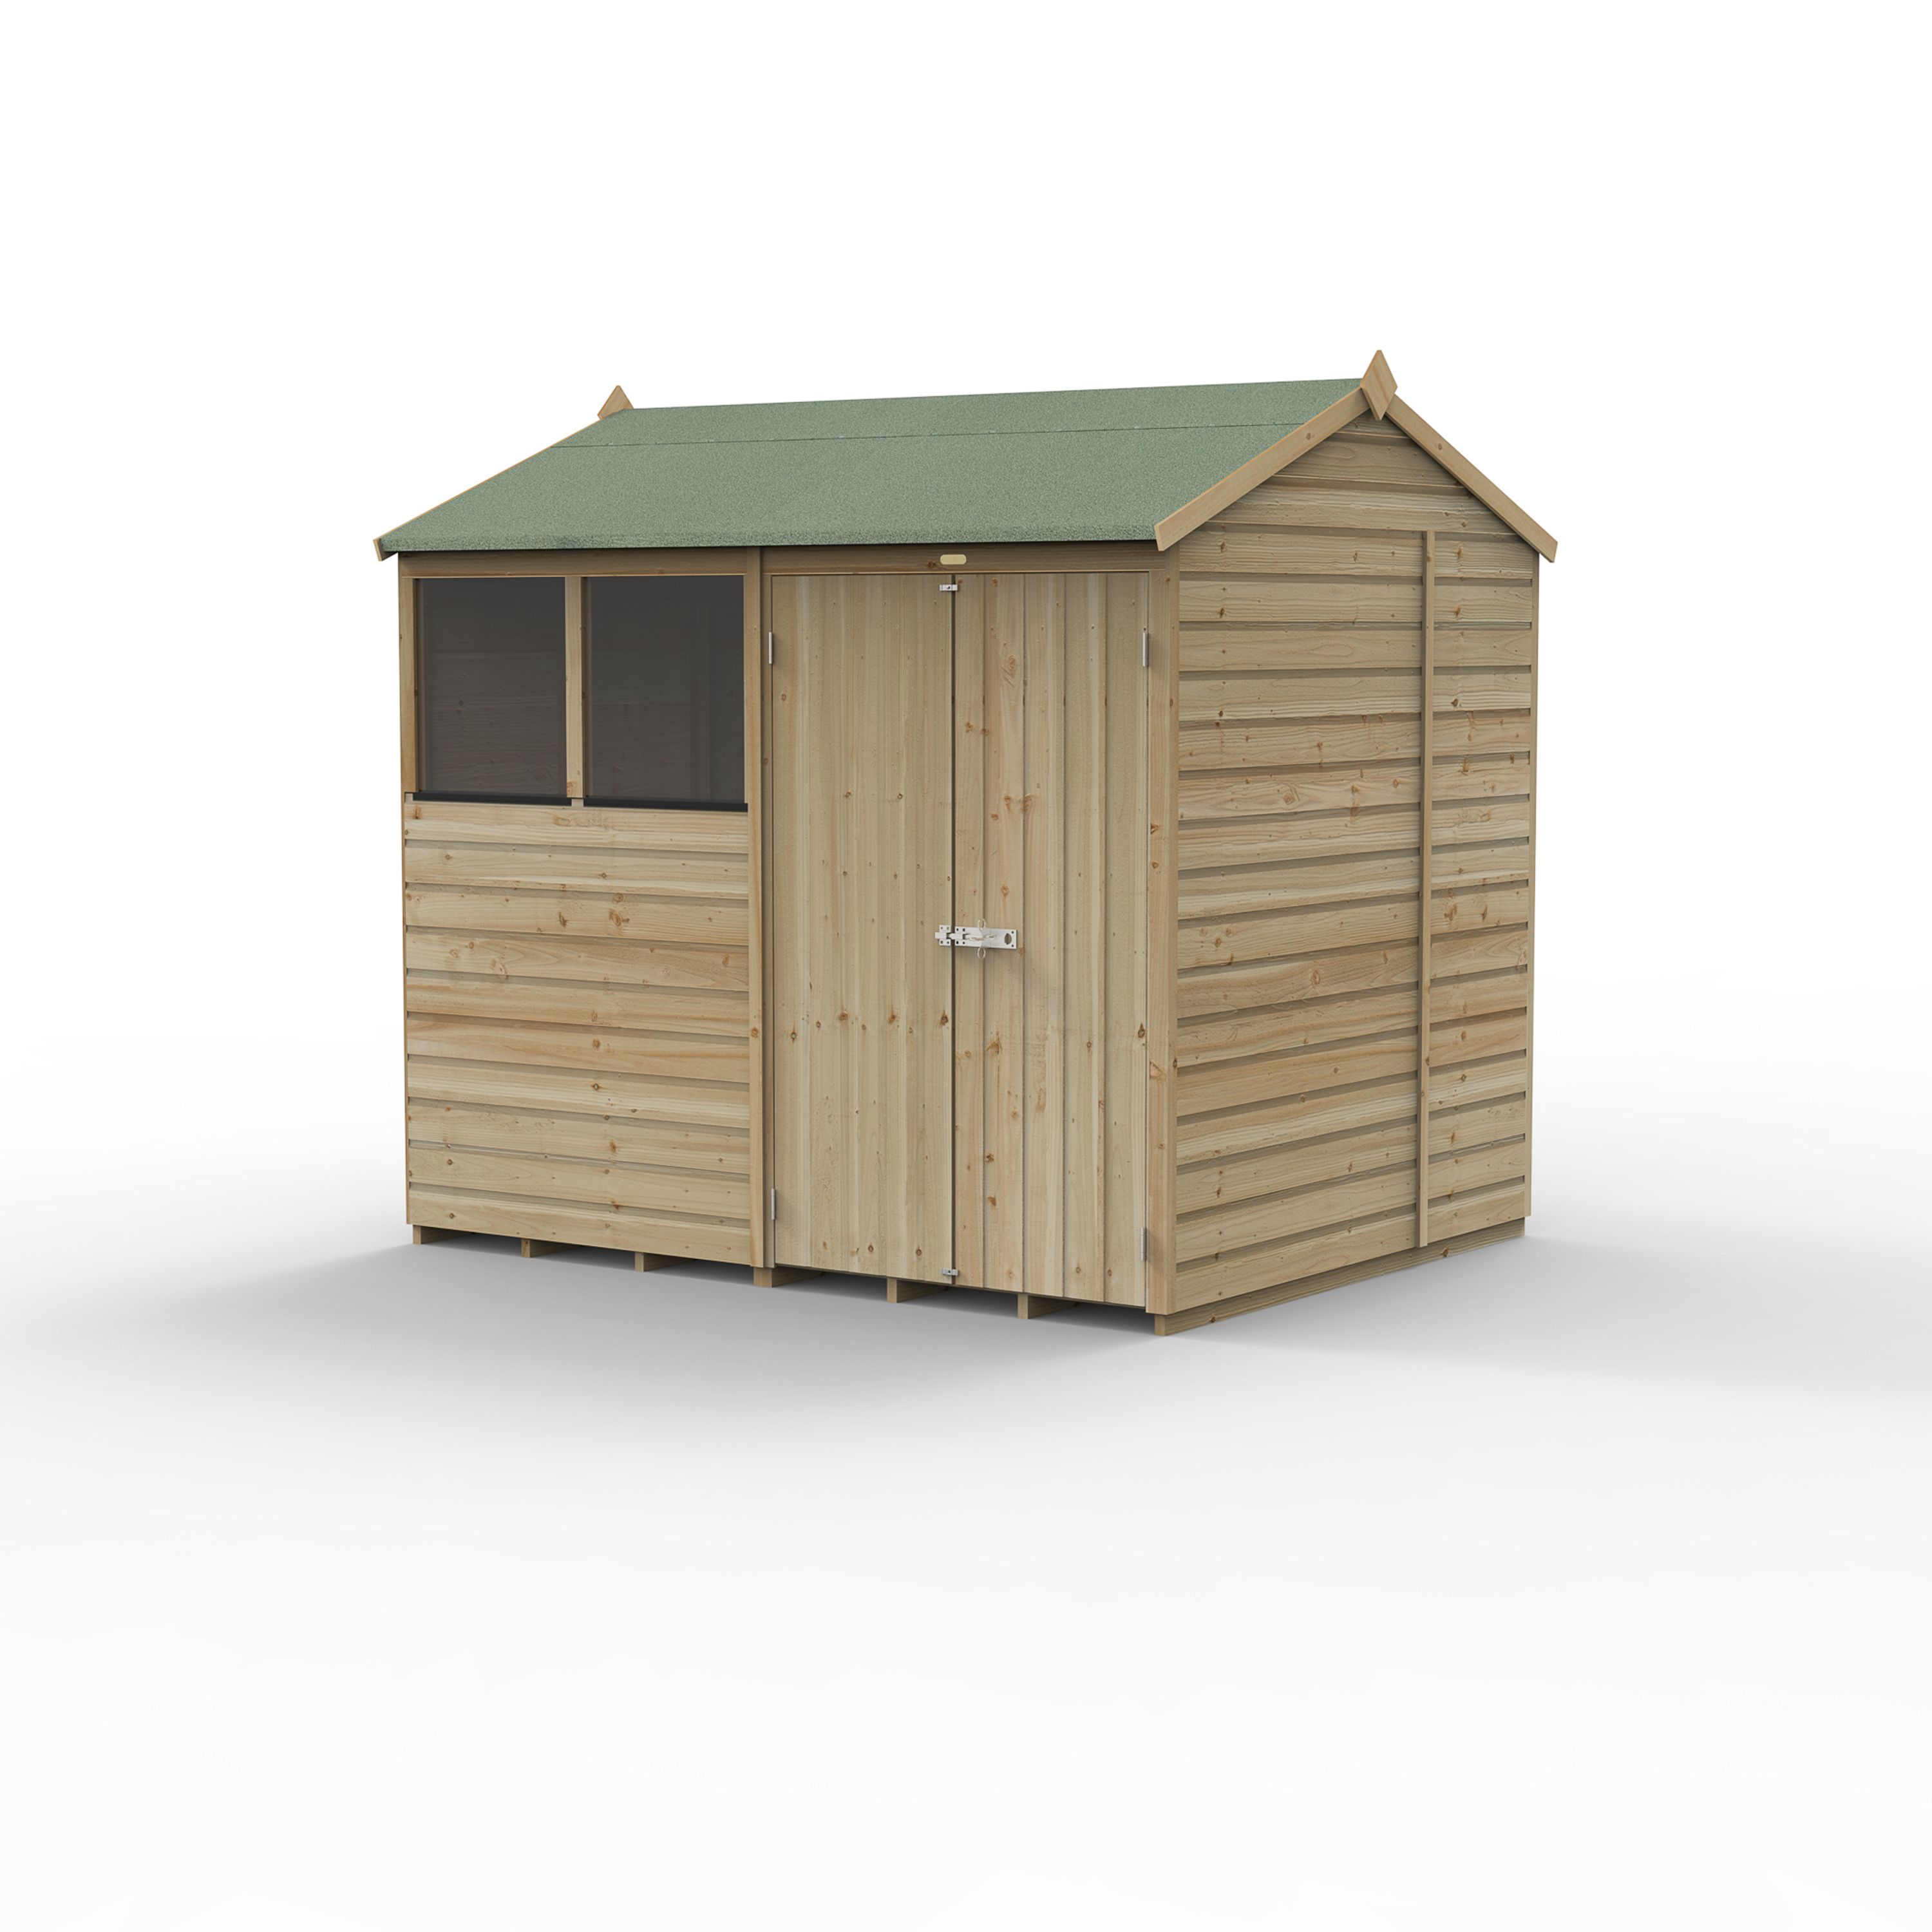 Forest Garden Beckwood 8x6 ft Reverse apex Natural timber Wooden 2 door Shed with floor & 2 windows (Base included) - Assembly not required